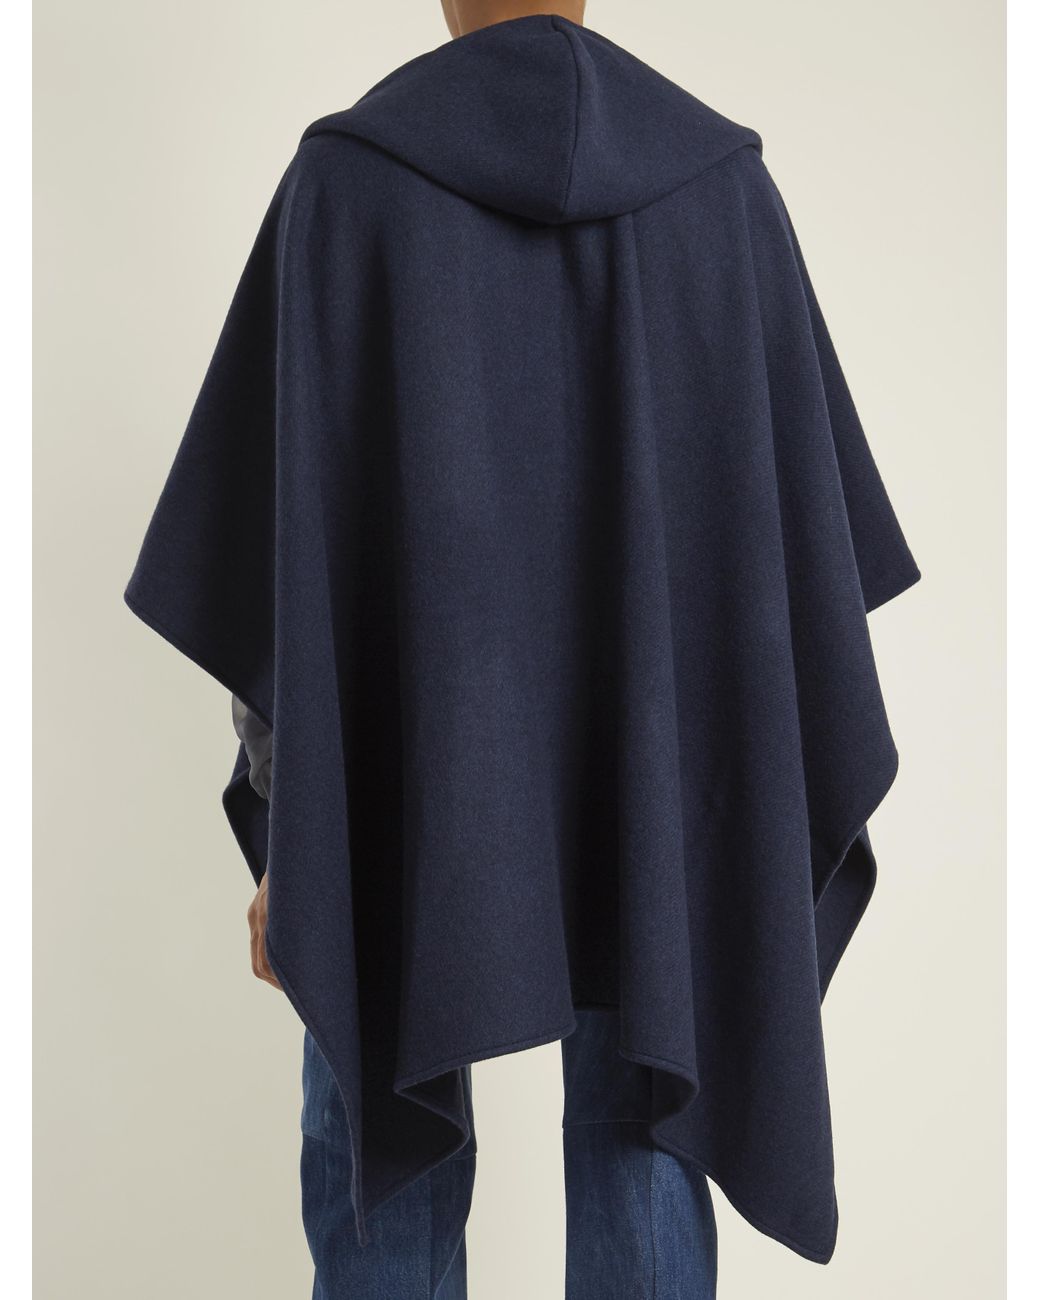 Balenciaga Hooded Wool And Cashmere-blend Poncho in Blue | Lyst